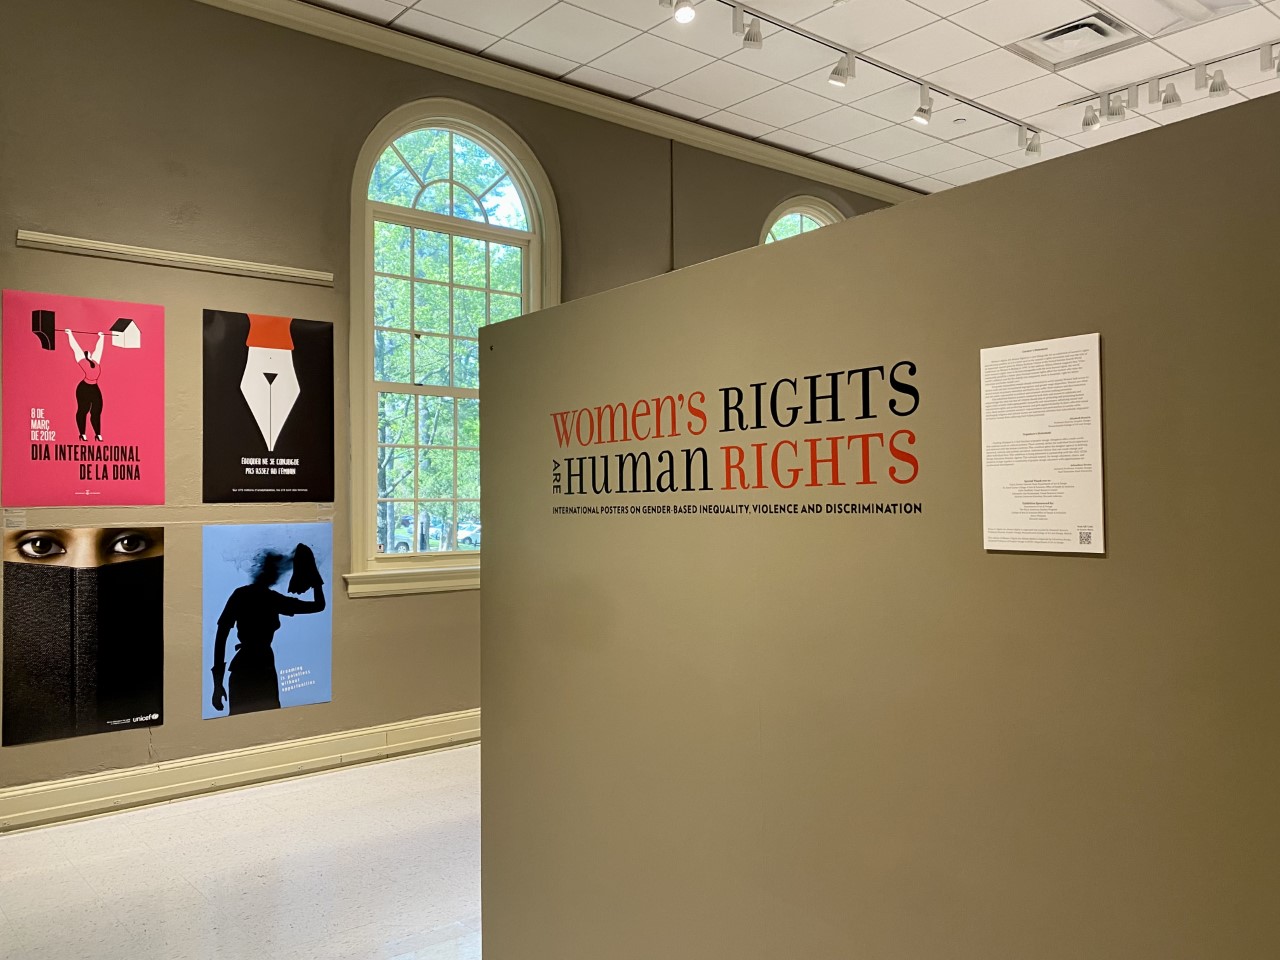 Women's Rights are Human Rights exhibit sign in the Reece Museum